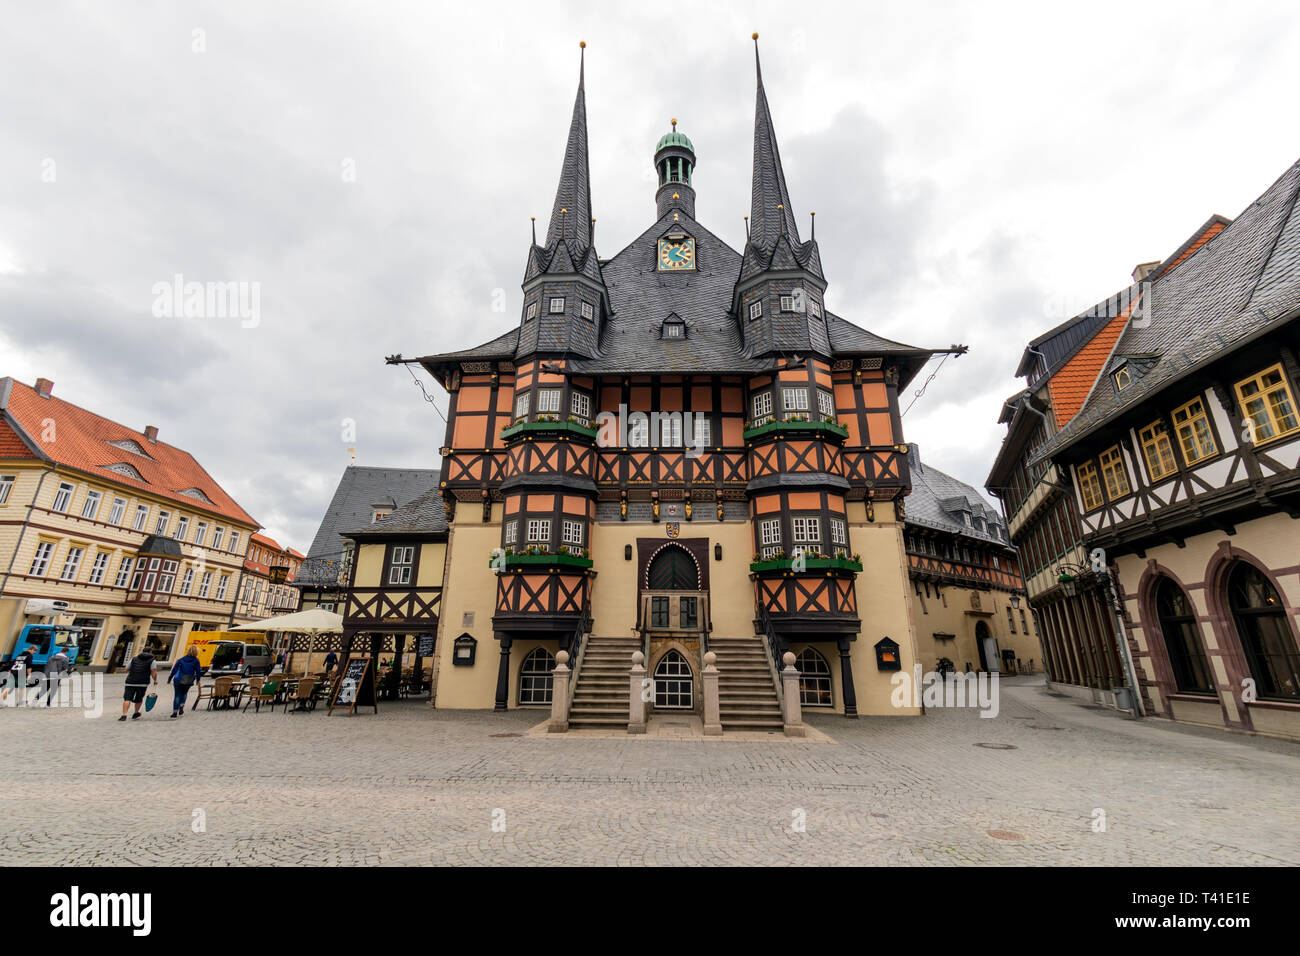 WERNIGRODE, GERMANY - APR 26, 2018: Historic town hall and htimber framed houses in the centre of Wernigerode town in Saxony-Anhalt, Germany Stock Photo